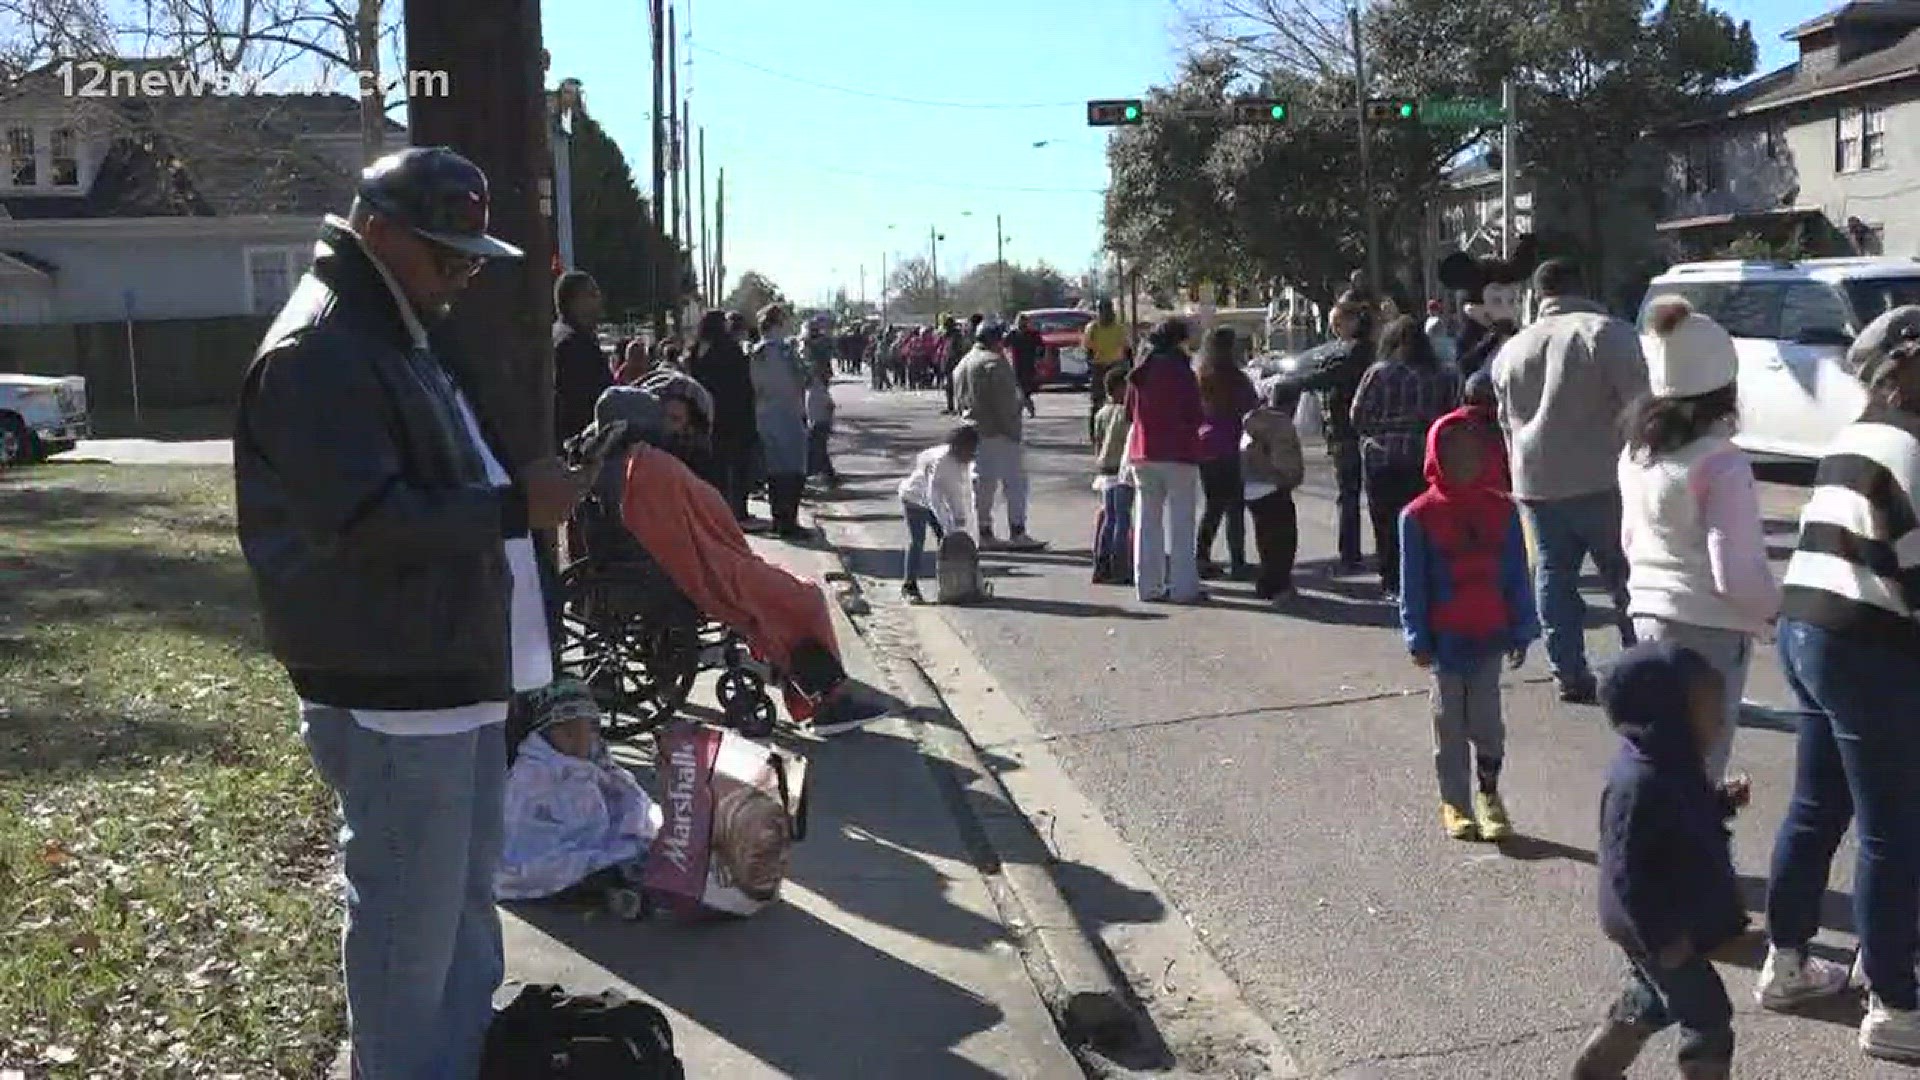 Hundreds lined the street at Highland Avenue in Beaumont to honor Martin Luther King Junior. For one Beaumont resident, this parade represents more than just a culture.